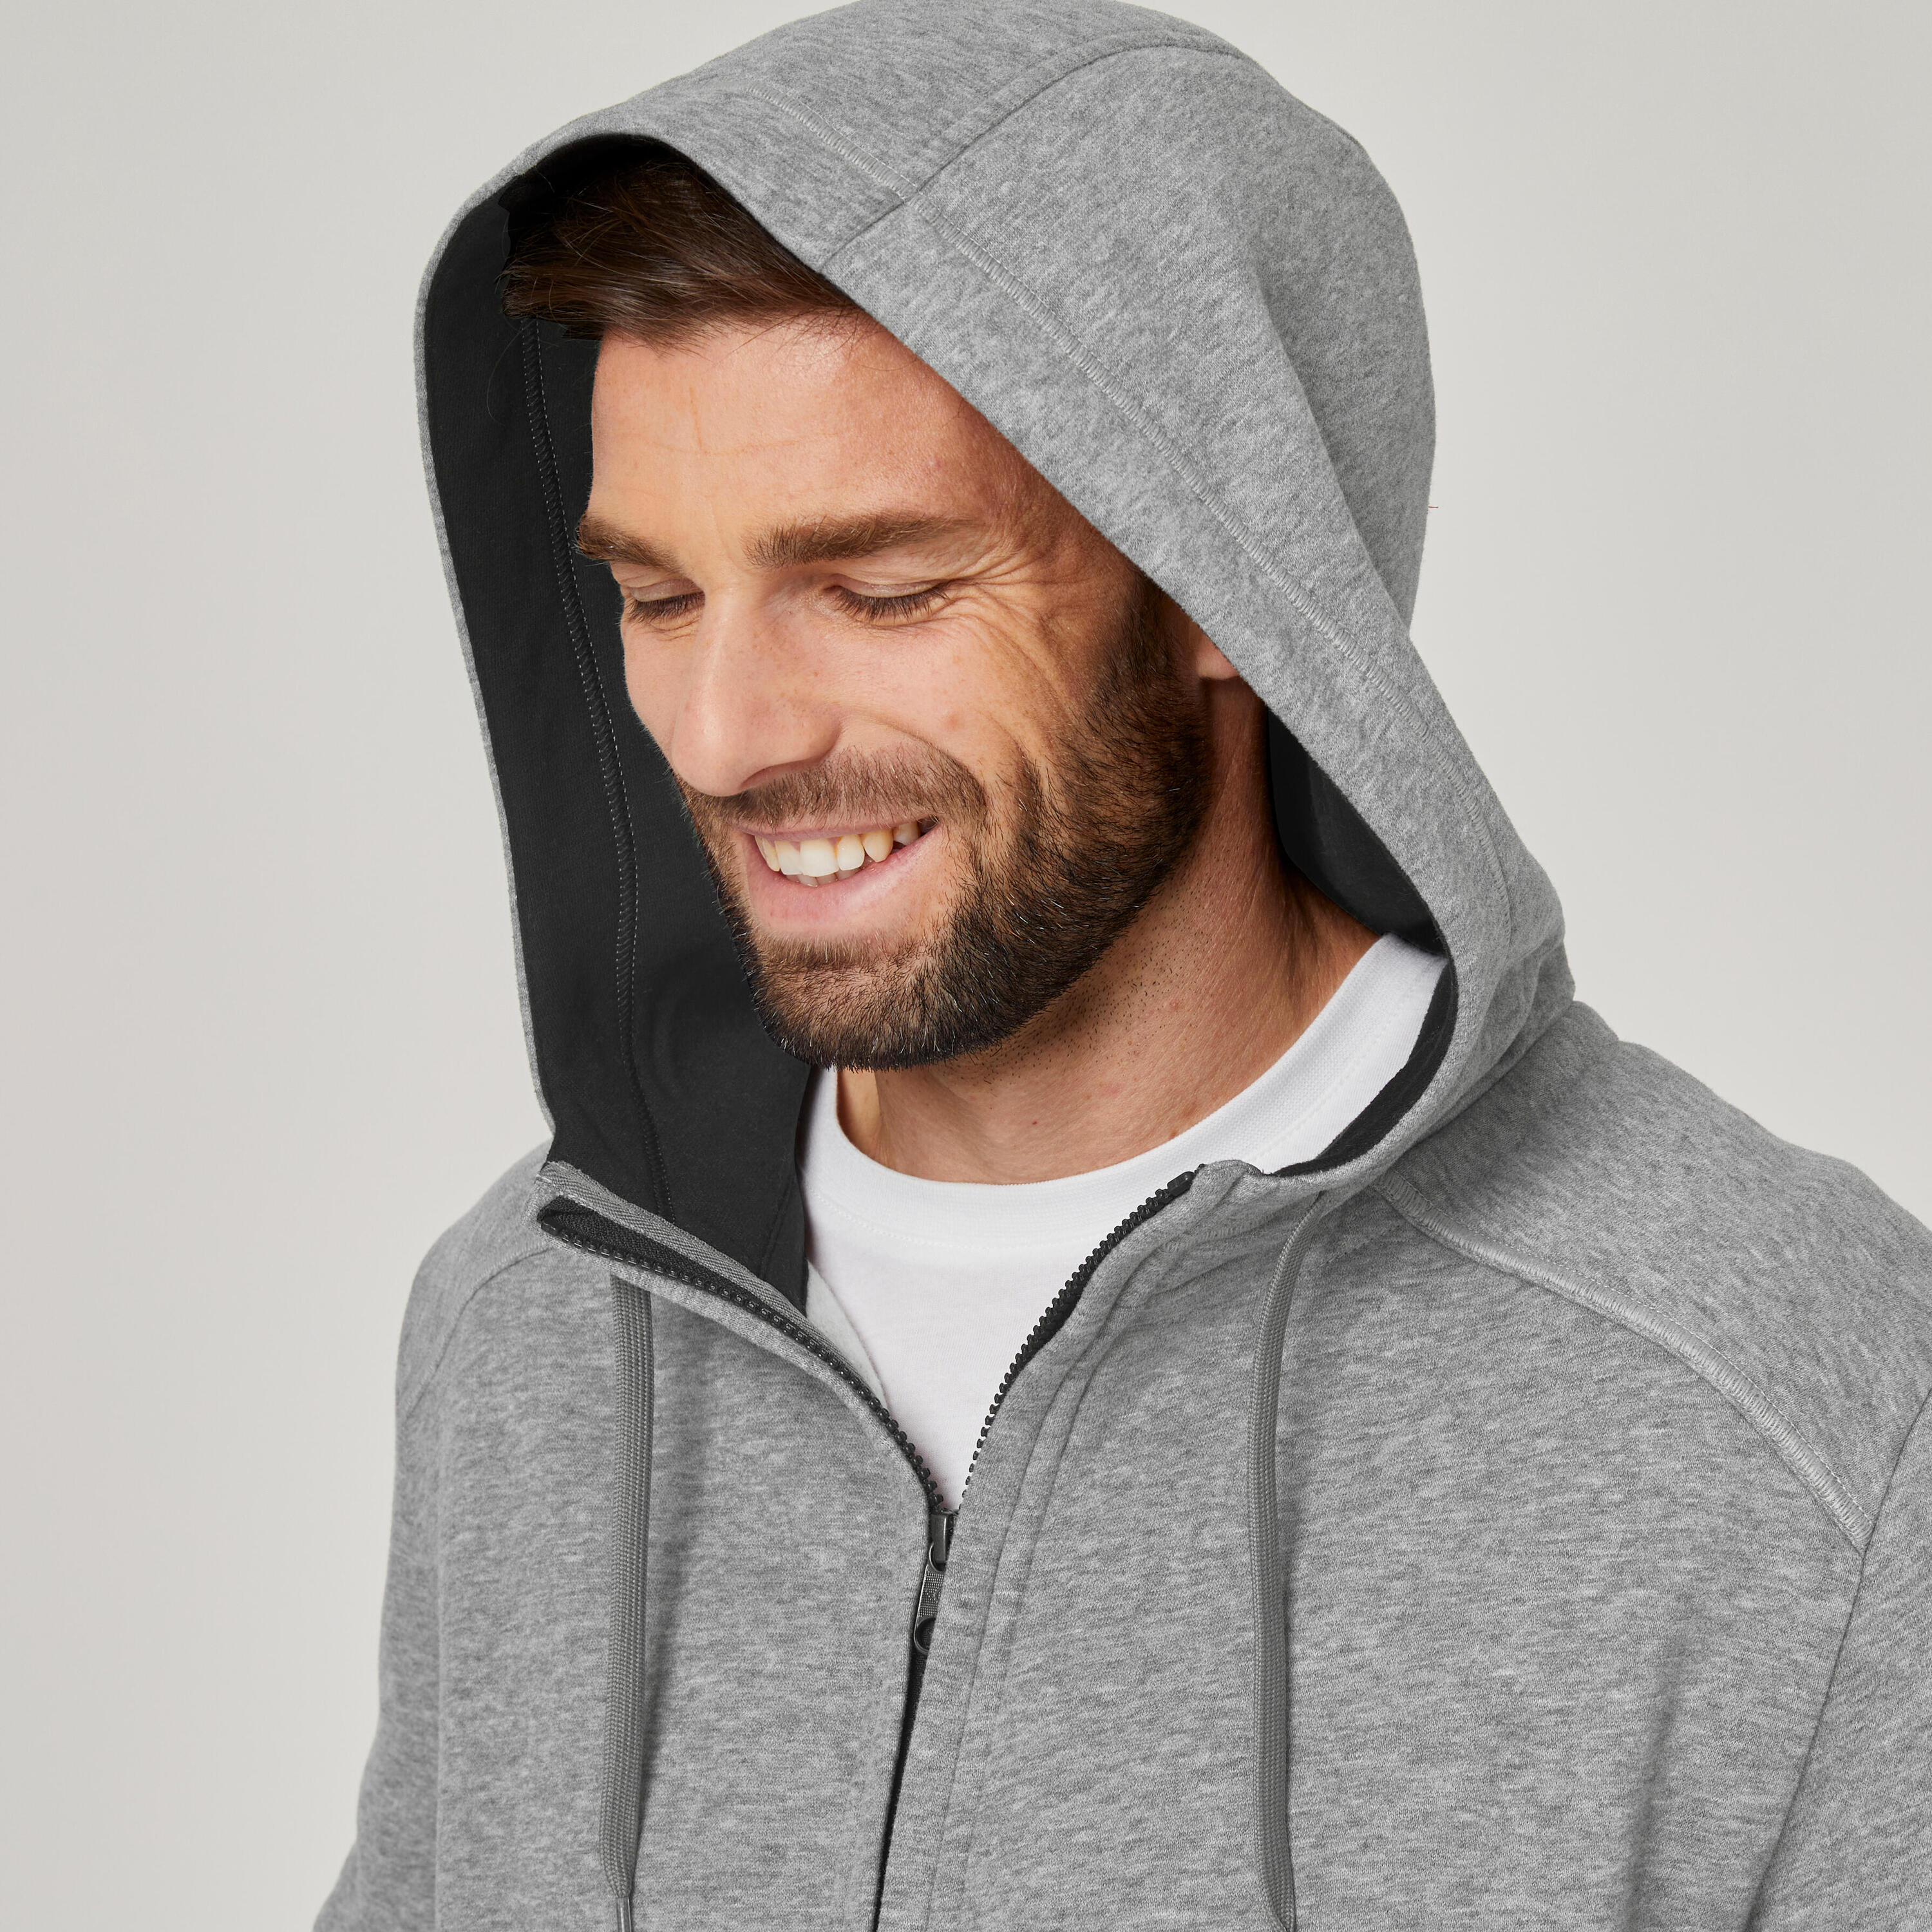 Men's Straight-Cut Zipped Hoodie With Pocket 500 - Grey 5/7